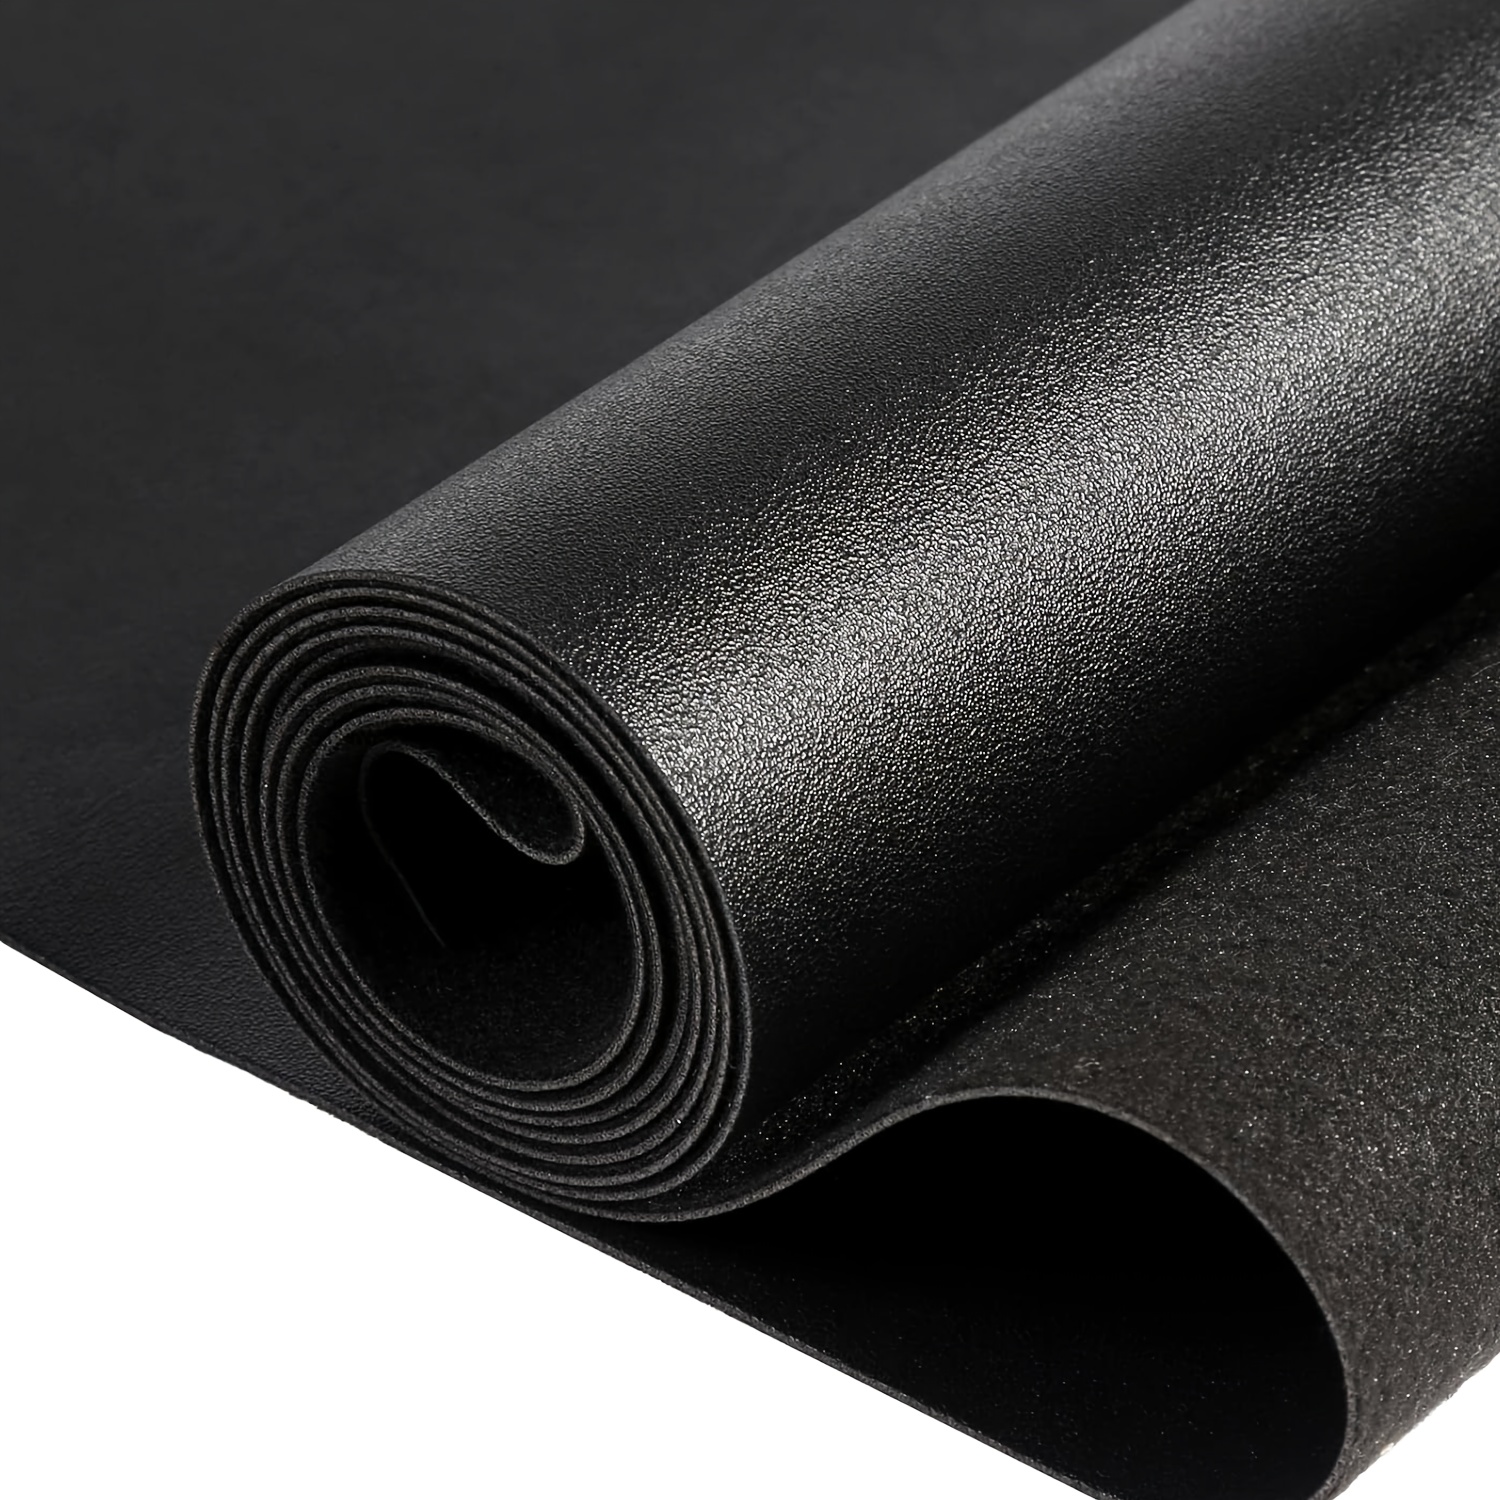 

1-2 Yards Upholster Vinyl Leather Fabric 1.0mm Thick Black Leather Soft Pu Faux Synthetic Leather Fabric By The Yard For Sofa Bags Chairs Car Seats Diy Crafts